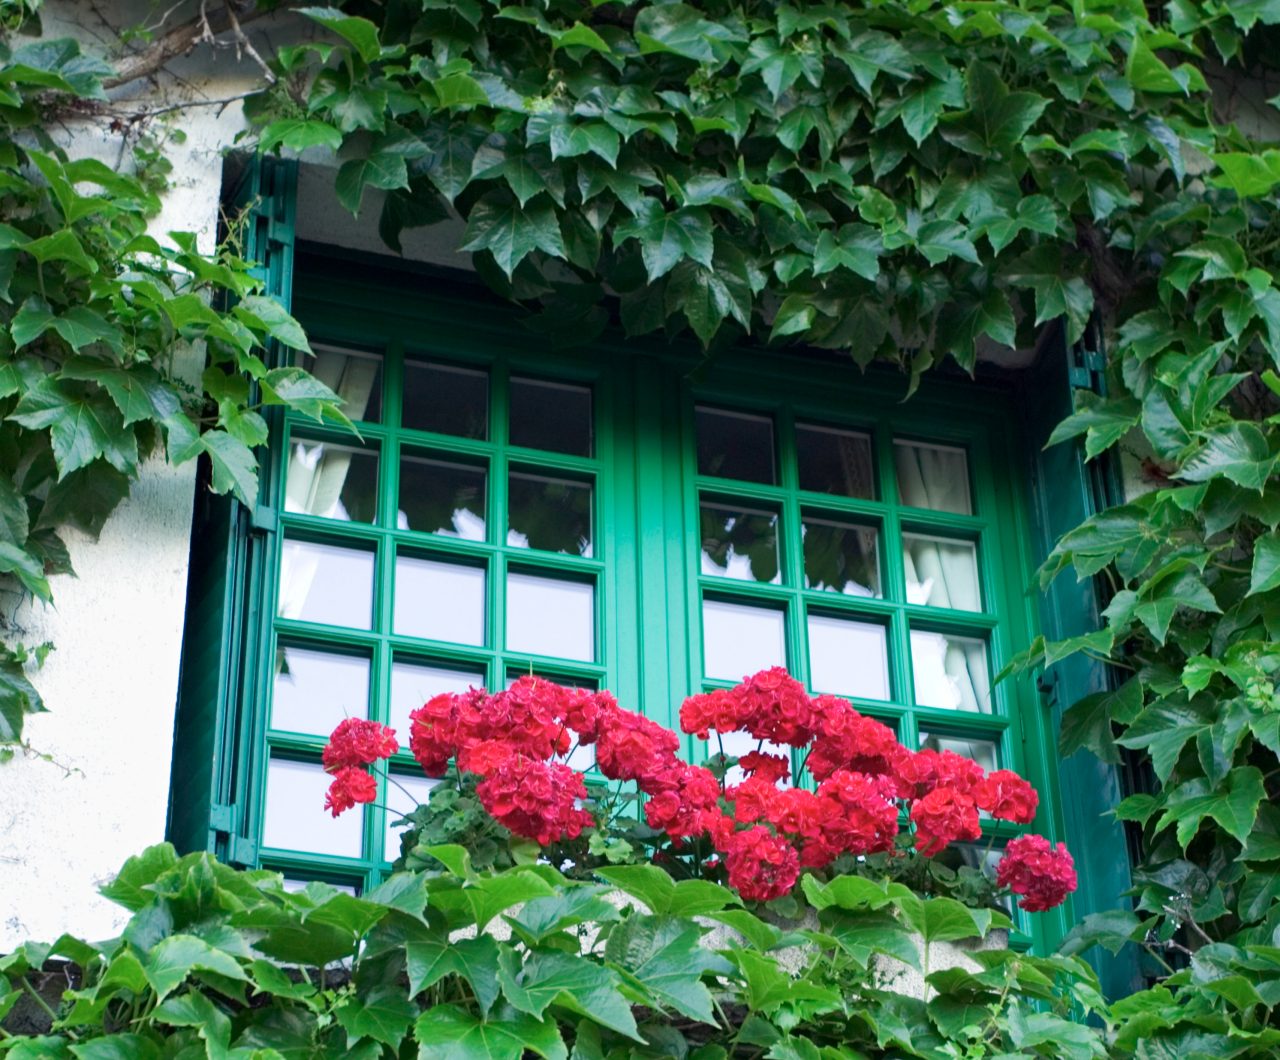 Green plants covering a home with the window uncovered and red flowers